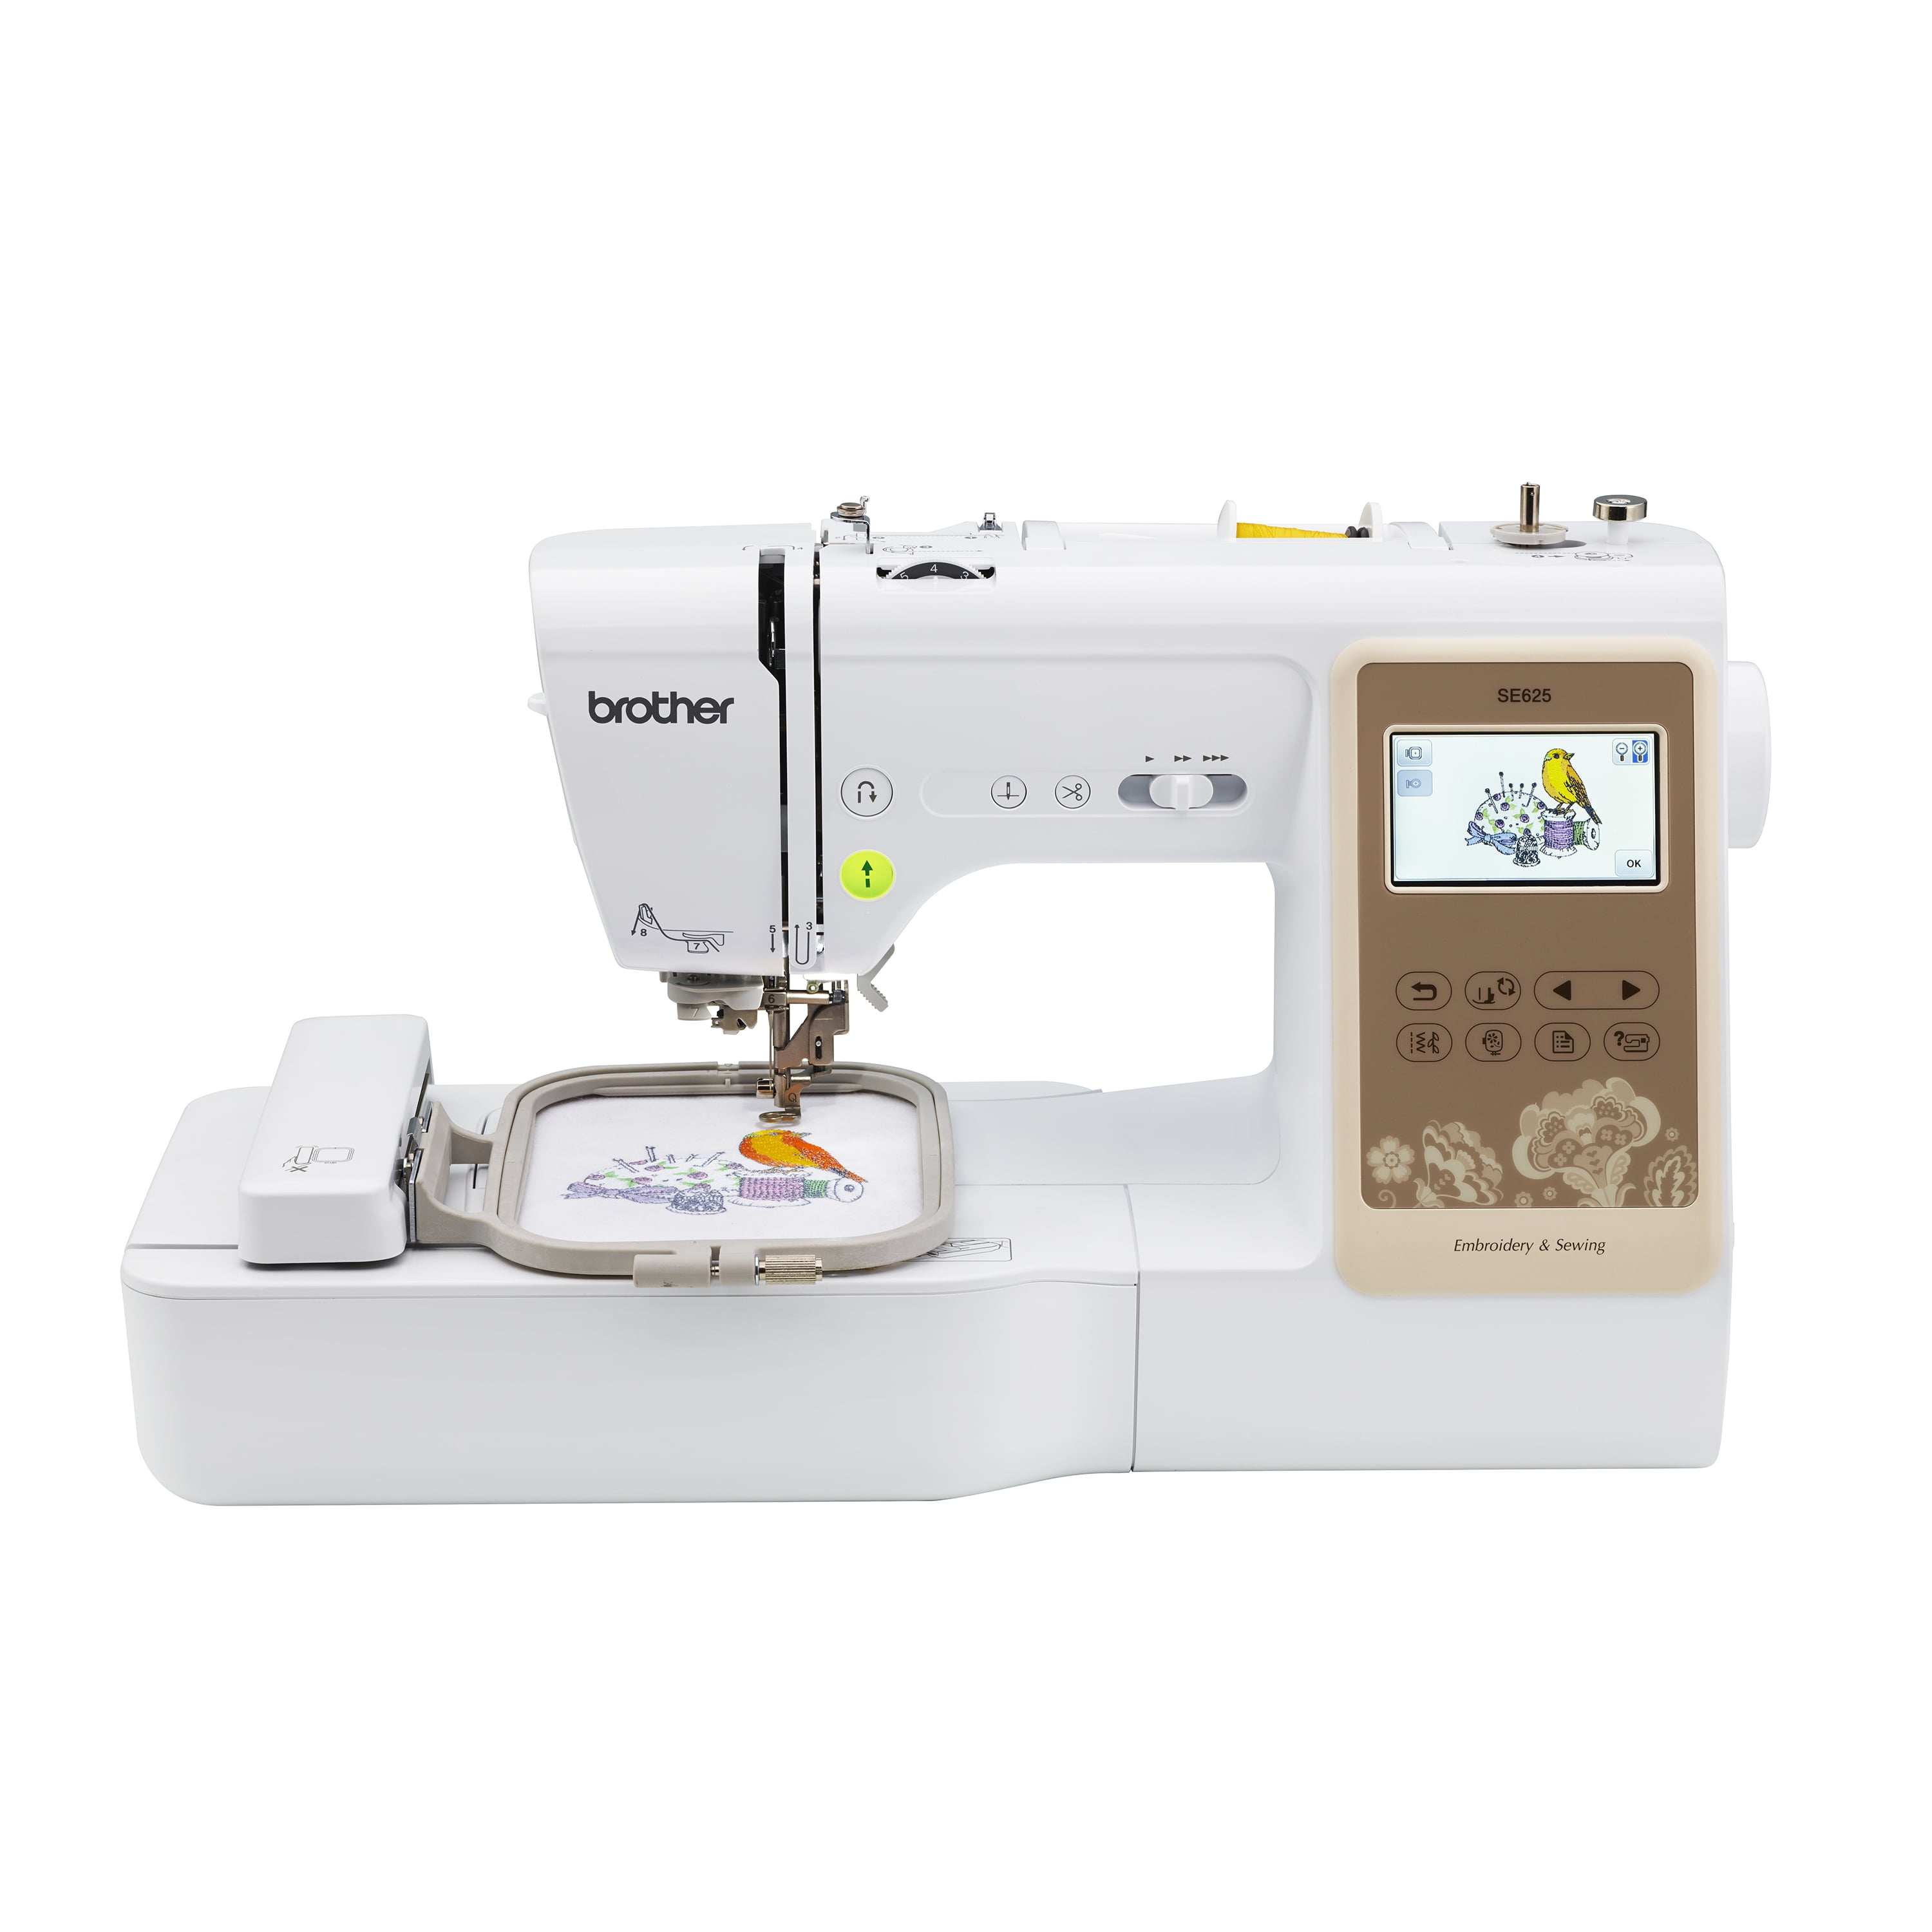 New!!! Brother SE625 Computerized Sewing & Embroidery Machine 